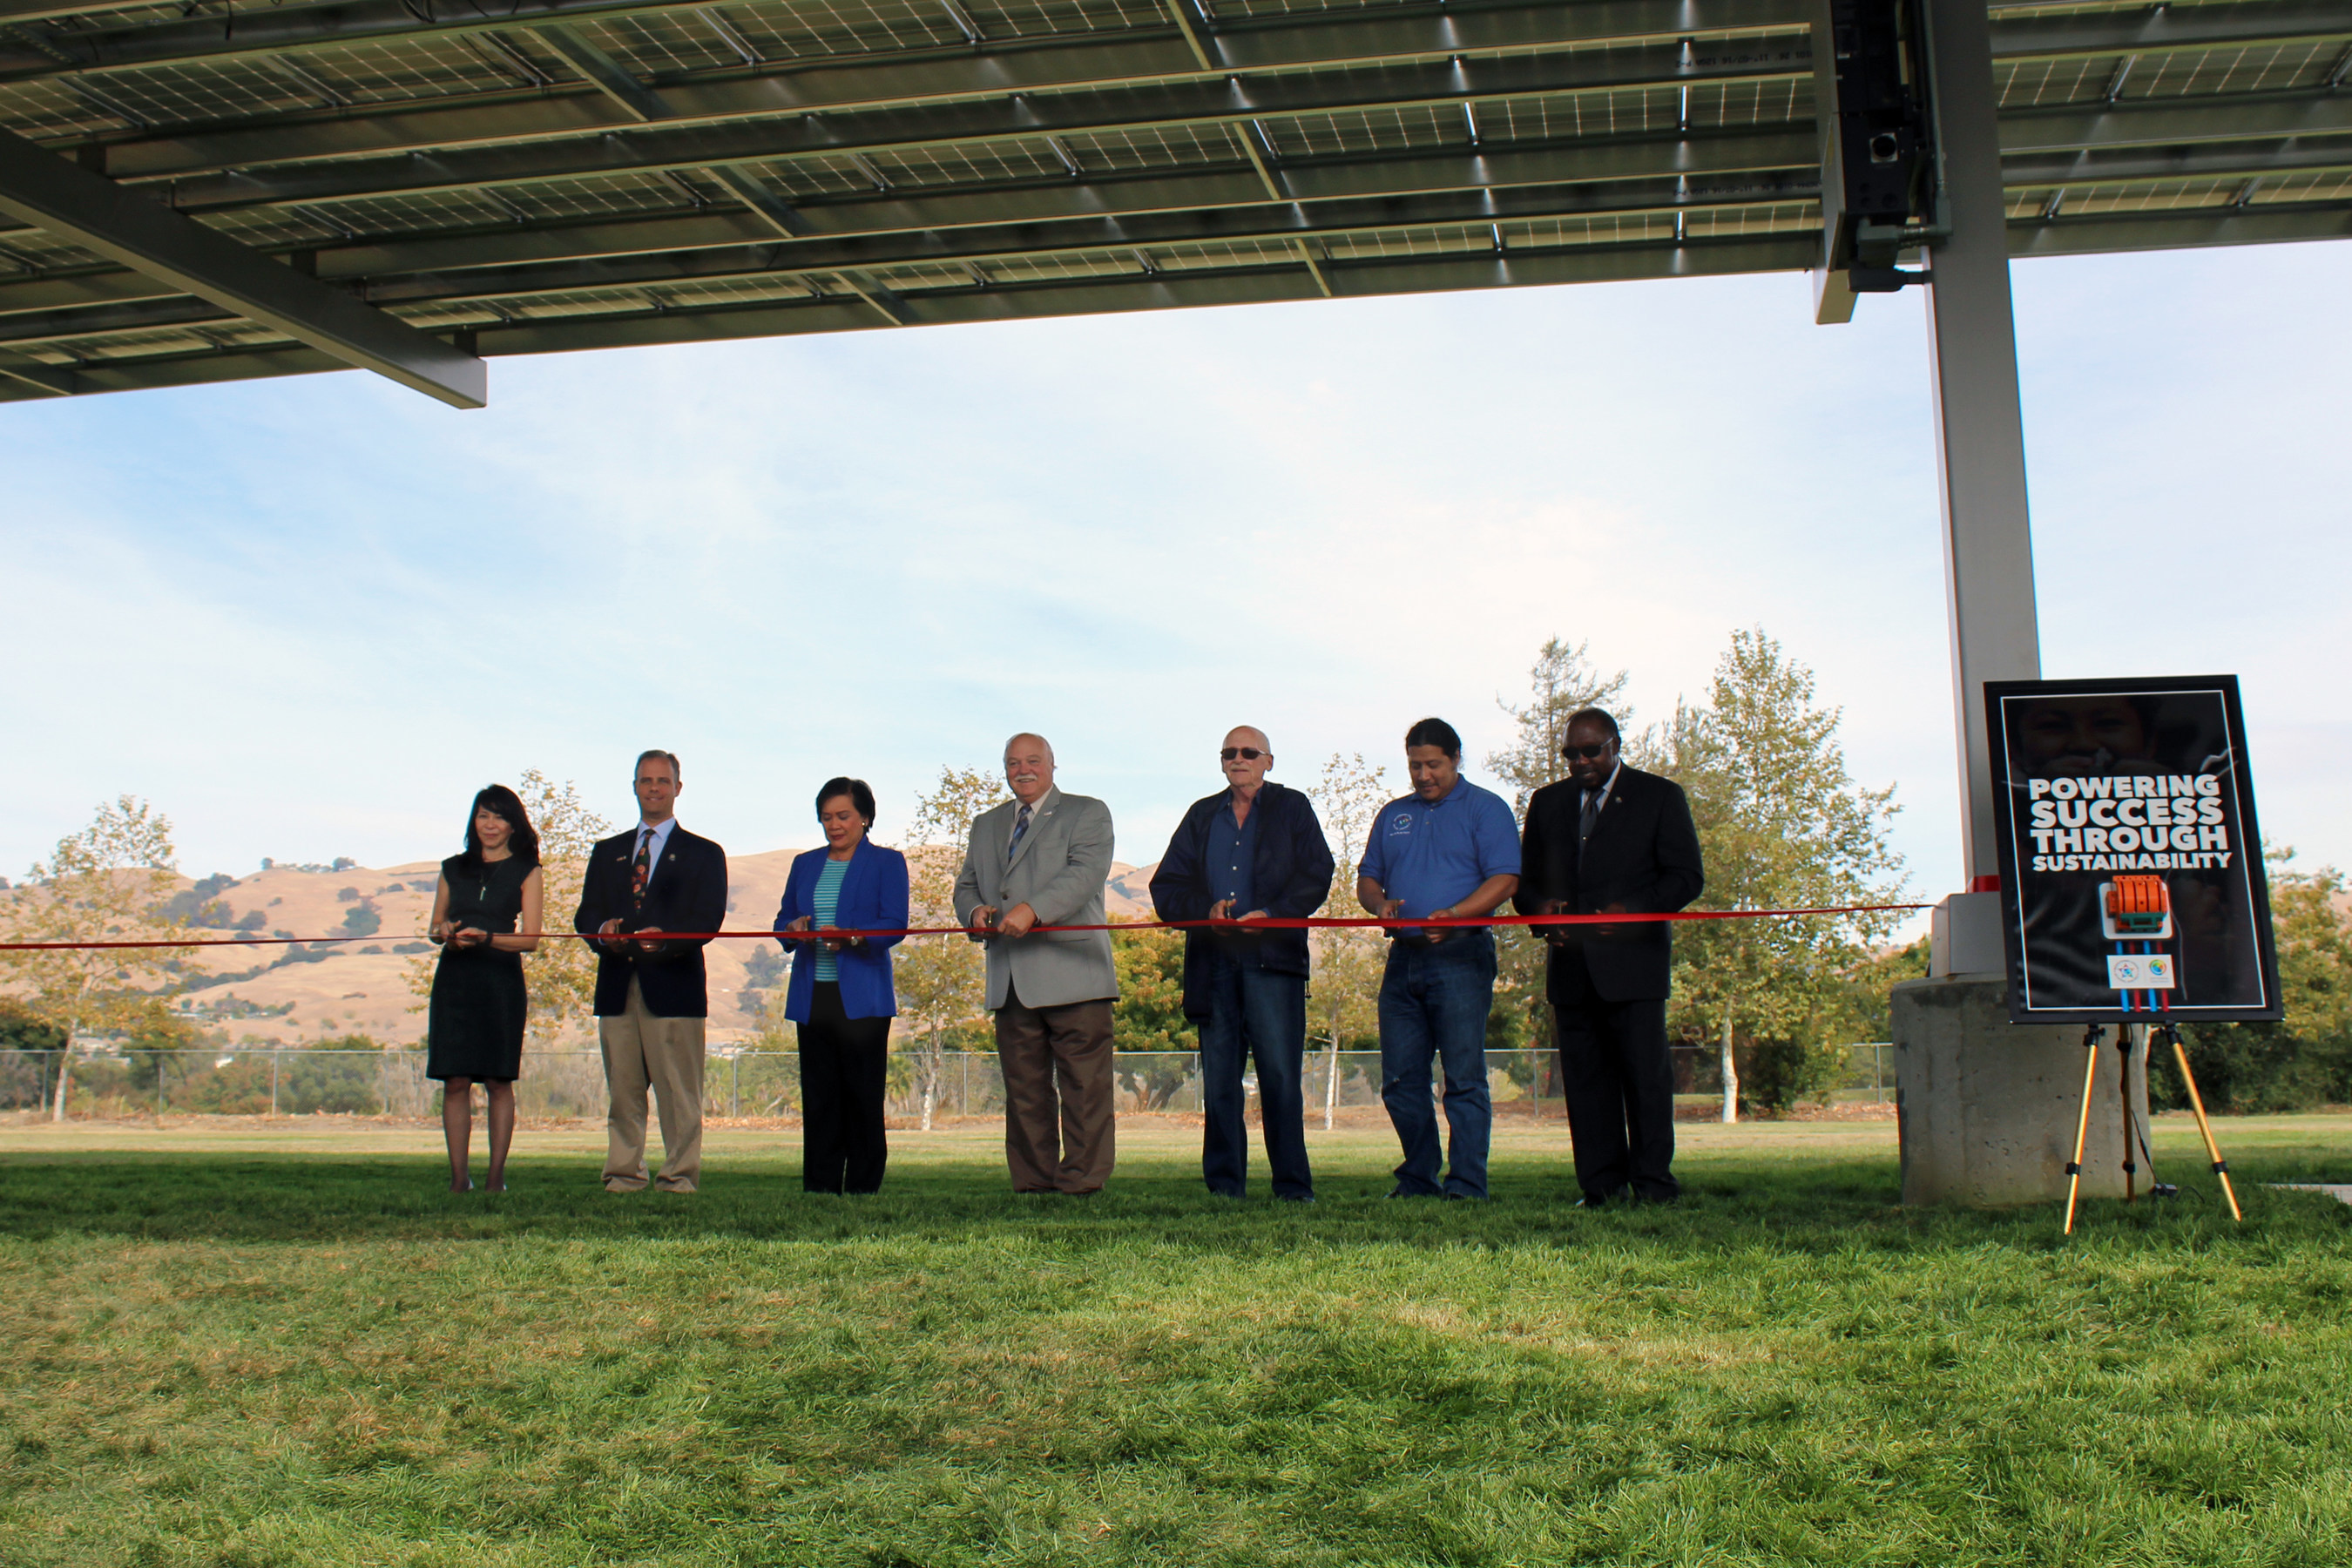 Berryessa USD Board Members and Leadership Team members commemorate completion of their District-wide modernization project during their recent ribbon cutting and "flip the switch" celebration on October 13th.